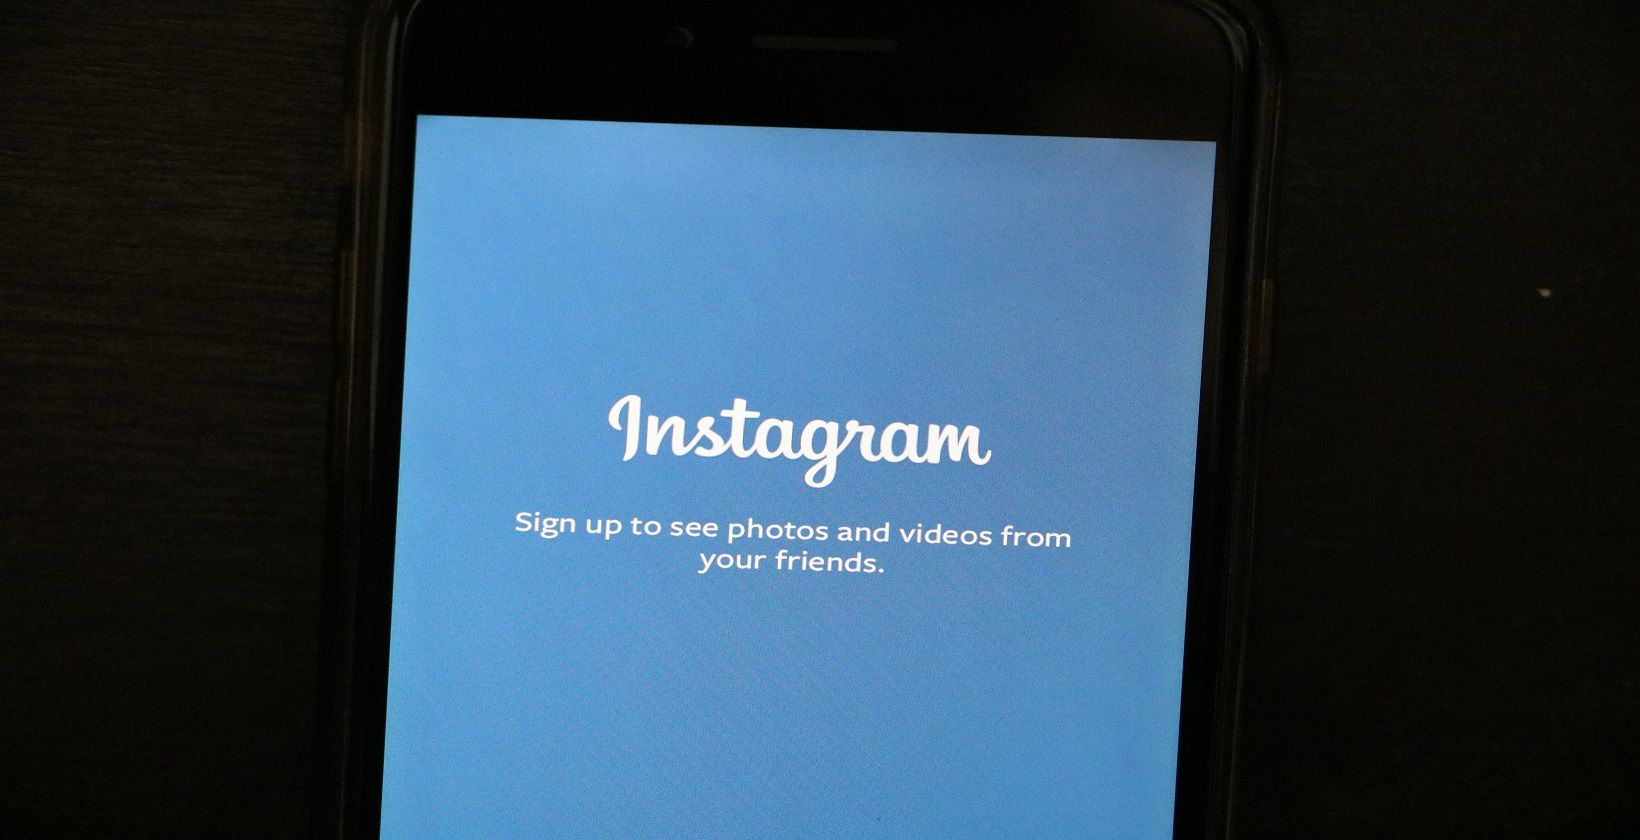 instagram interface on mobile phone screen